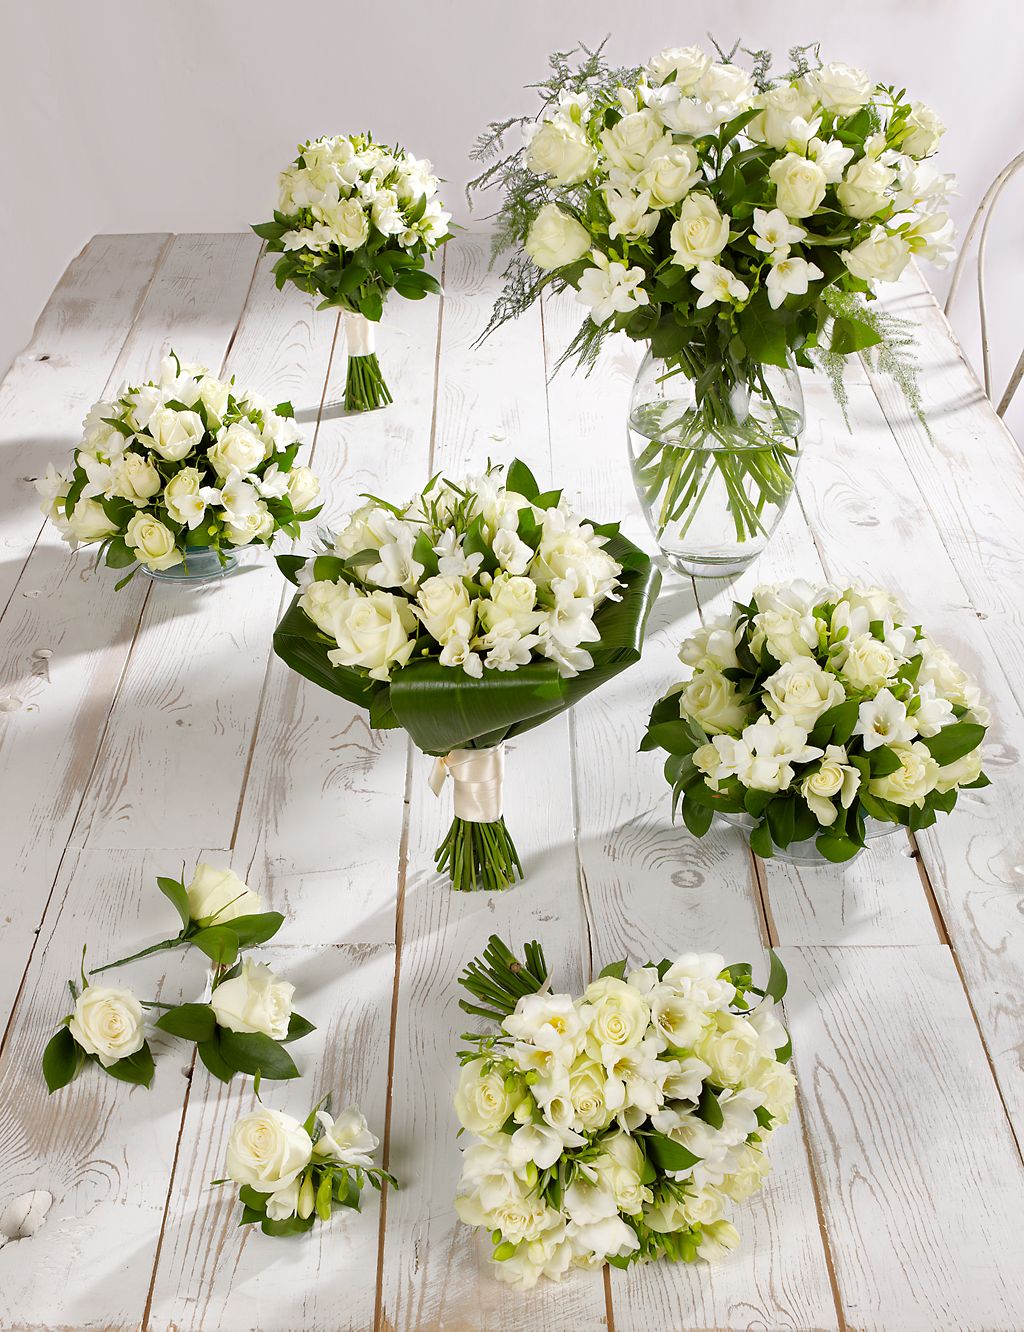 White Rose & Freesia Wedding Flowers - Collection 4 1 of 1